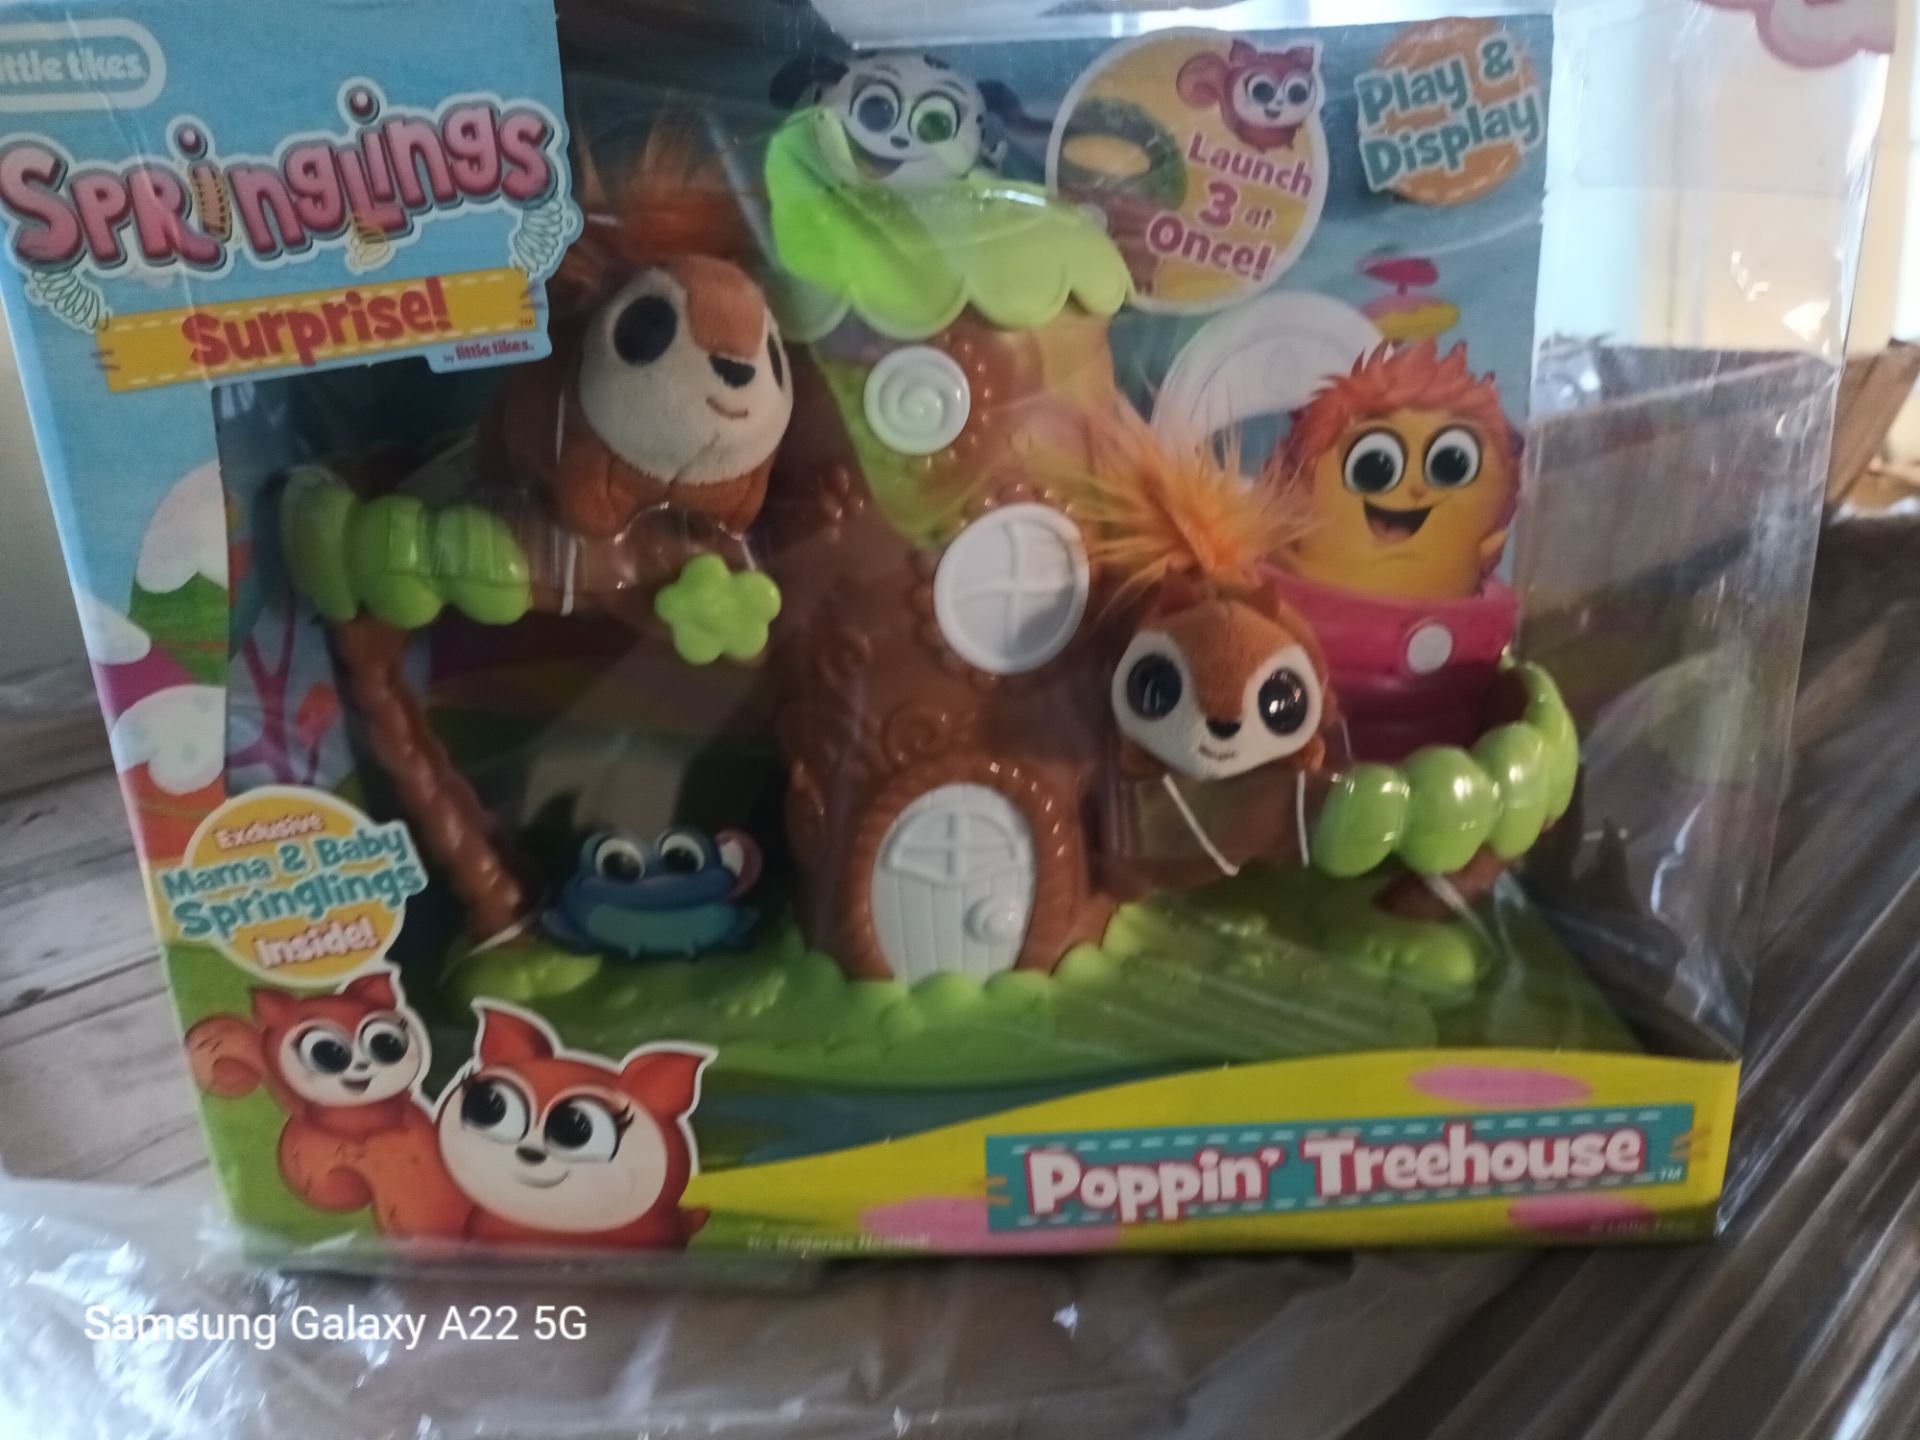 PALLET OF 60 X SPRINGLINGS SUPRISE POPPING TREEHOUSE - Bild 2 aus 3